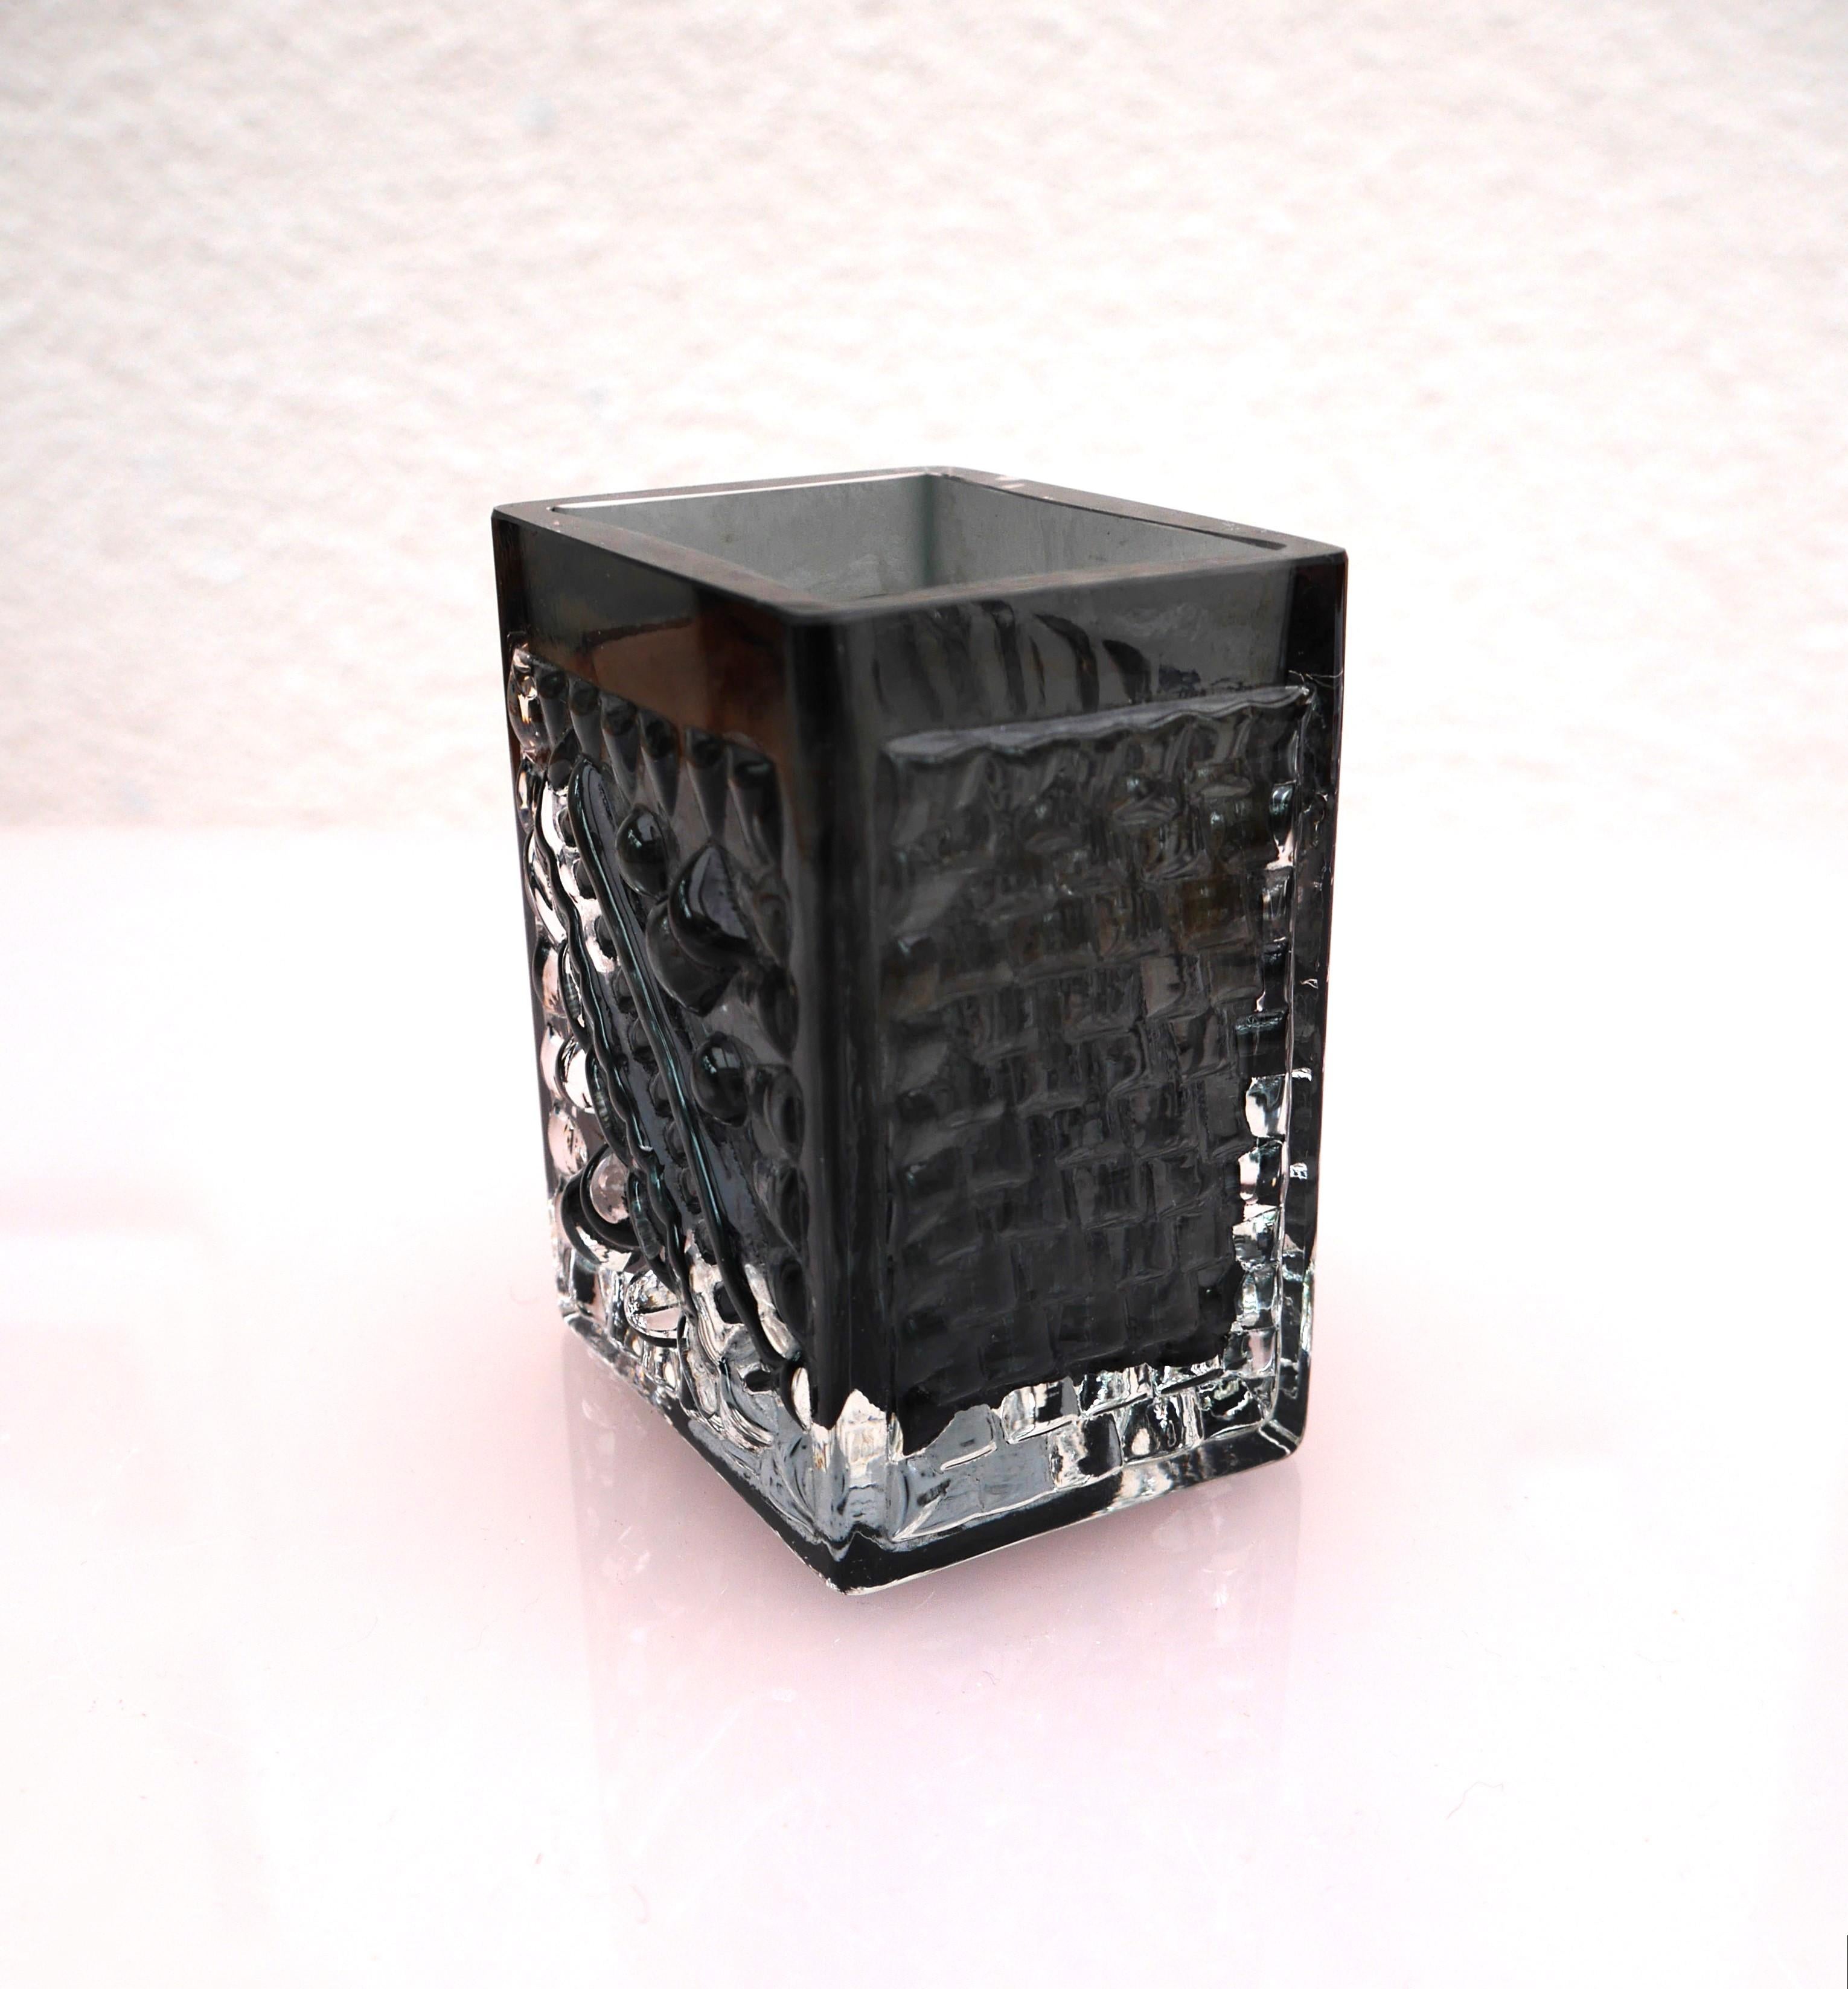 This is a stunning vintage art glass vase, by the very talented Josef Schott made at Smålandshyttan, Sweden. The colour is a dark grey almost black and it has a fantastic pattern, made in the 1970's. The vase oozes 70s design and will be an addition